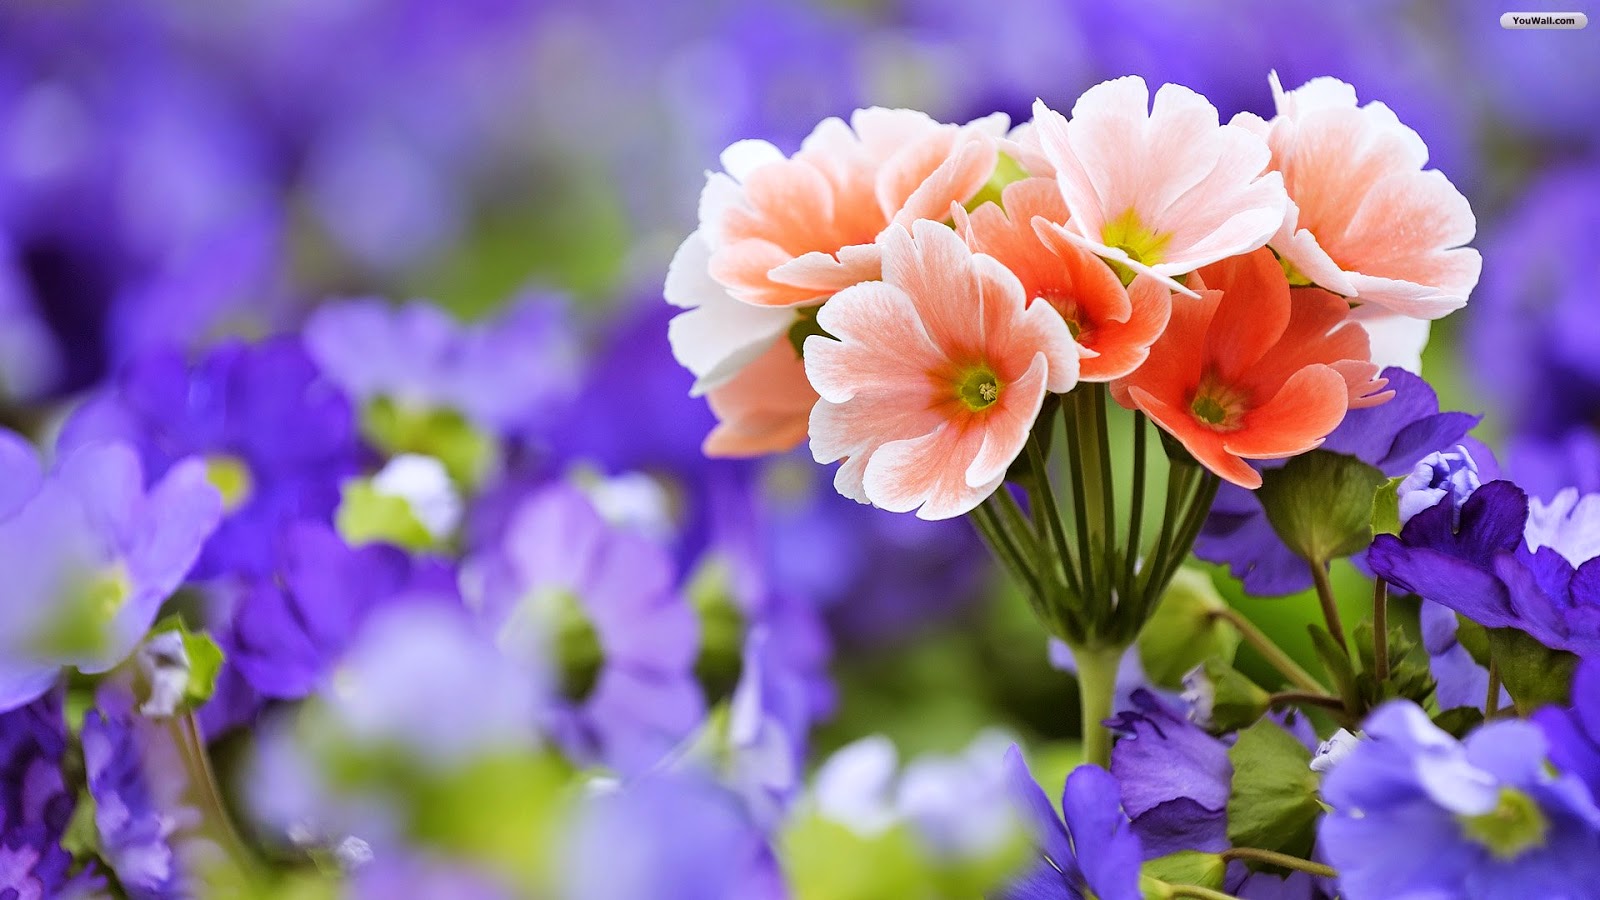 Most Beautiful Flowers in the World - Flower With Styles